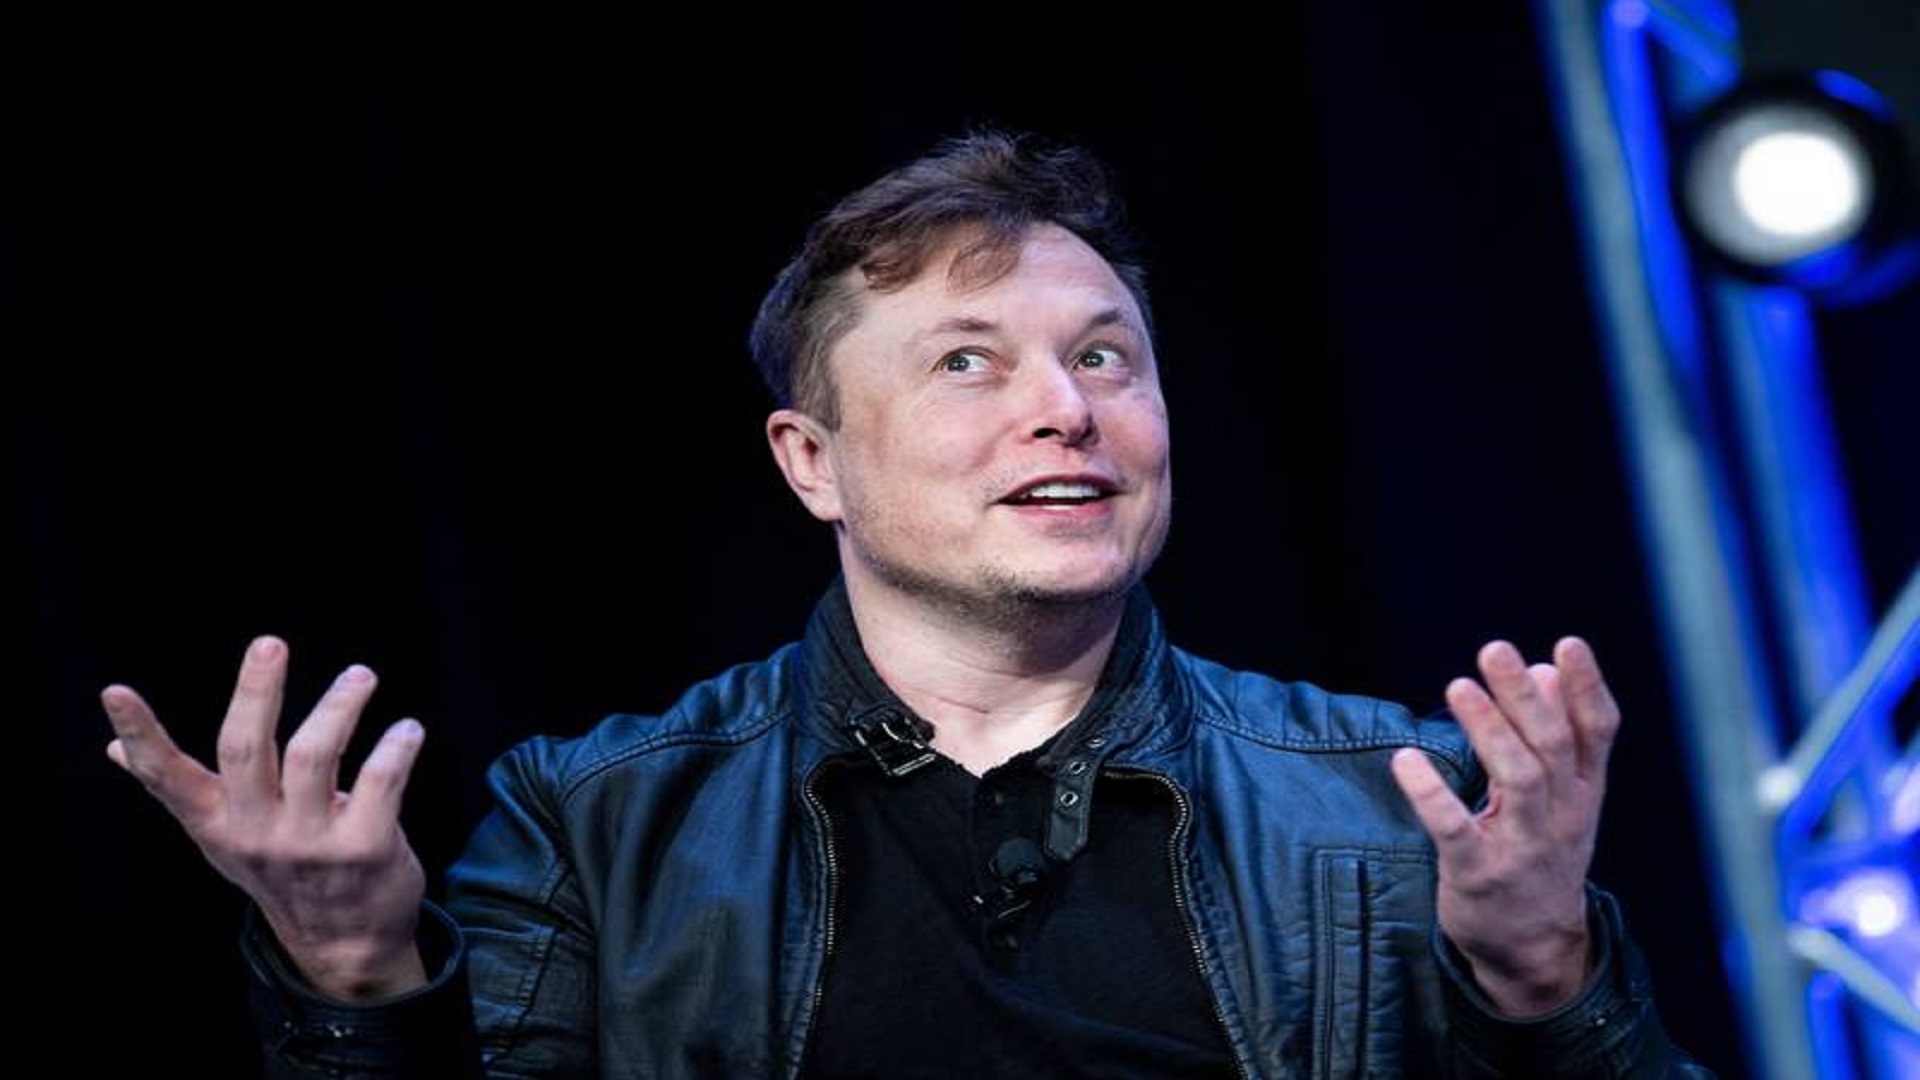  Tesla chief executive Elon Musk spent about $2.6 billion on Twitter stock - a fraction of his estimated wealth of $265bn. Photo: AFP